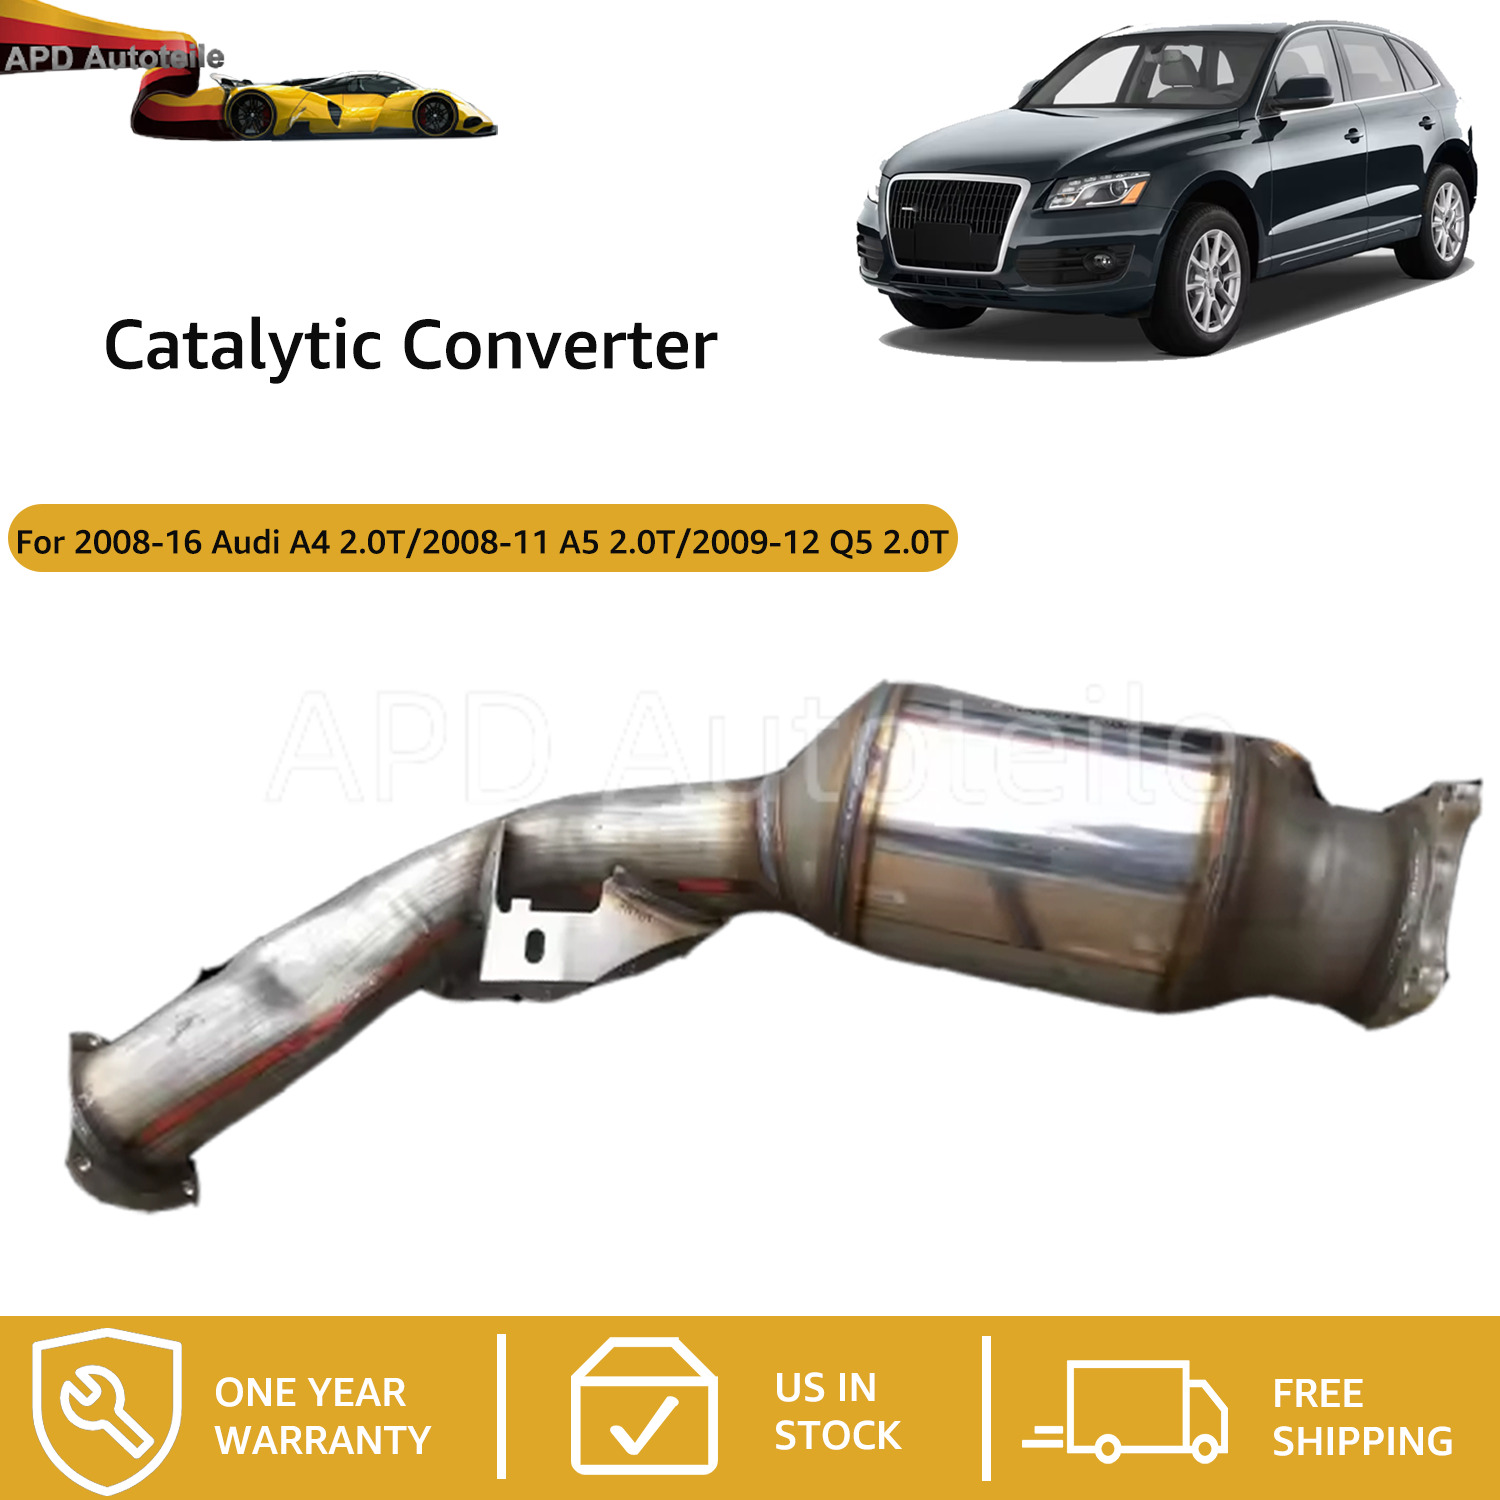 Catalytic Converter For 2008-16 Audi A4 2.0T/ 2008-11 A5 2.0T/ 2009-12 Q5 2.0T